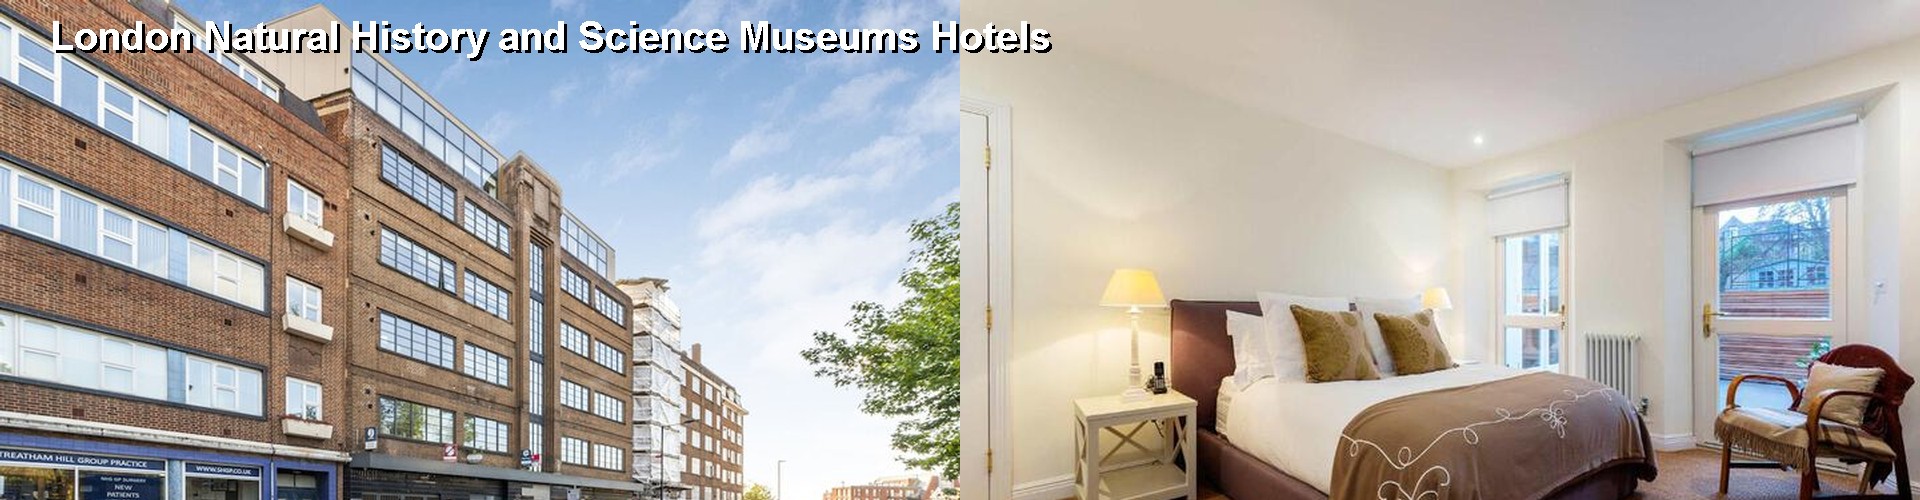 5 Best Hotels near London Natural History and Science Museums